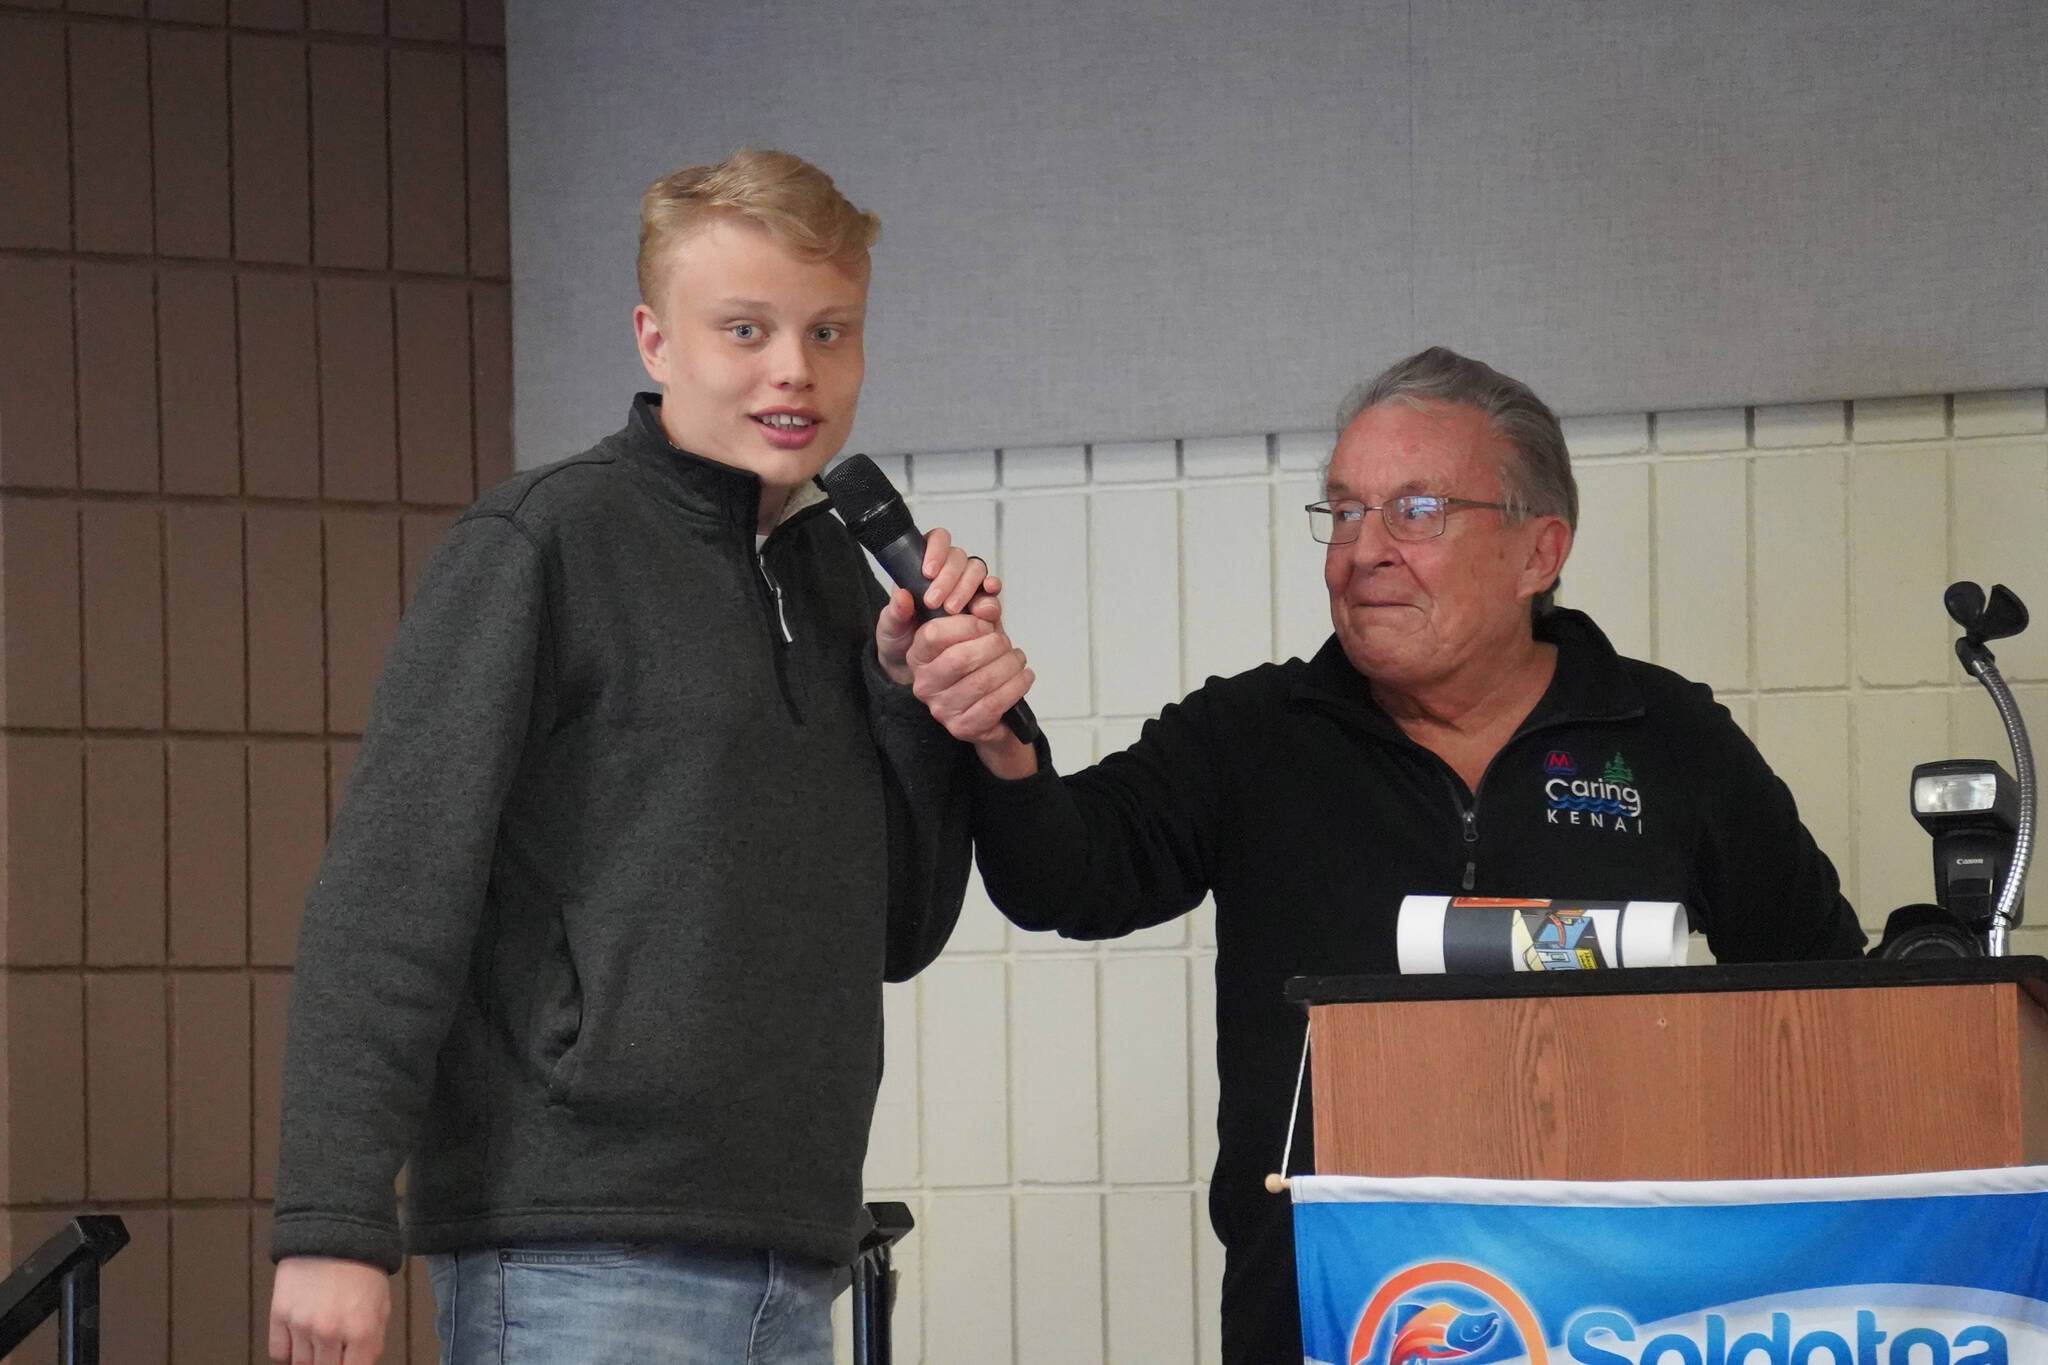 Liam Bartholomew, of Cook Inlet Academy, is introduced by Merrill Sikorski at the Caring for the Kenai Awards Celebration held during a Joint Chamber Luncheon on Wednesday, May 3, 2023, at the Soldotna Regional Sports Complex in Soldotna, Alaska. (Jake Dye/Peninsula Clarion)